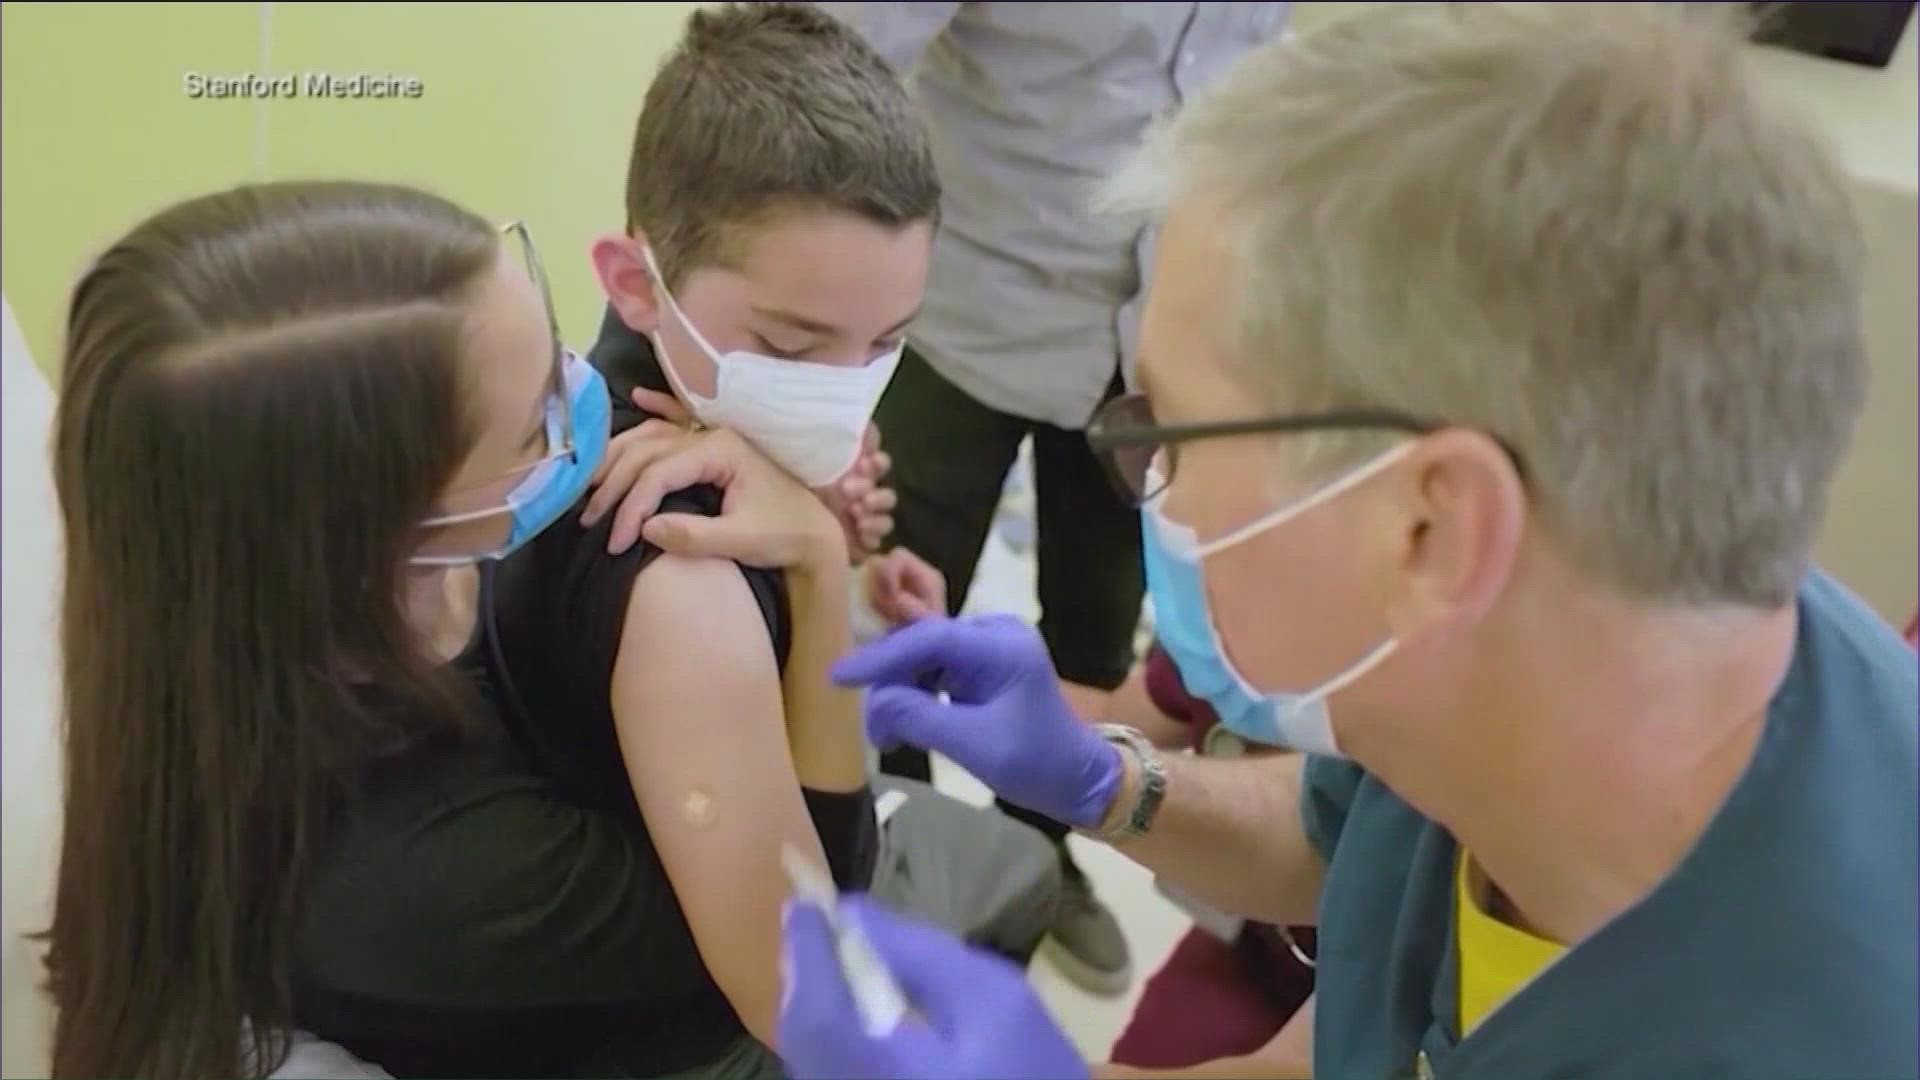 With flu season beginning, health experts say now is the time to get your kids updated on their vaccines.